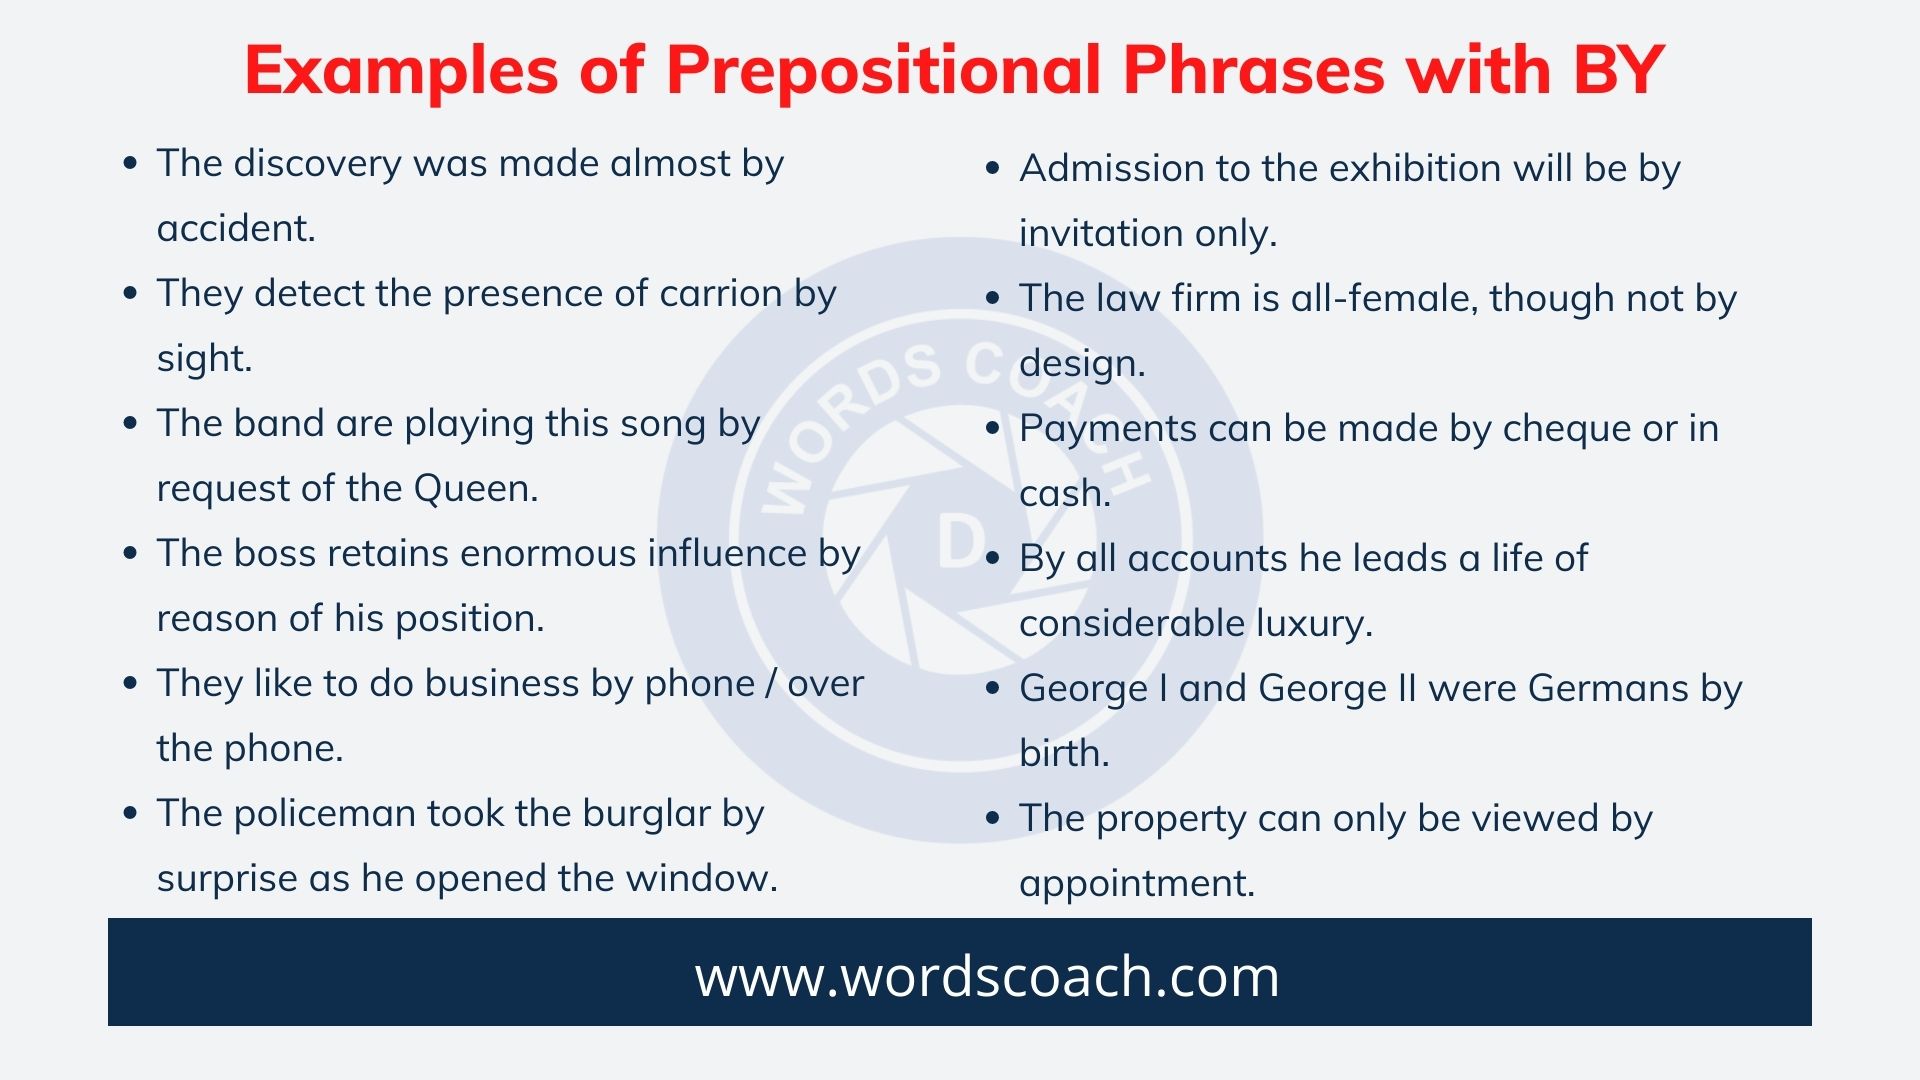 Examples of Prepositional Phrases with BY - wordscoach.com